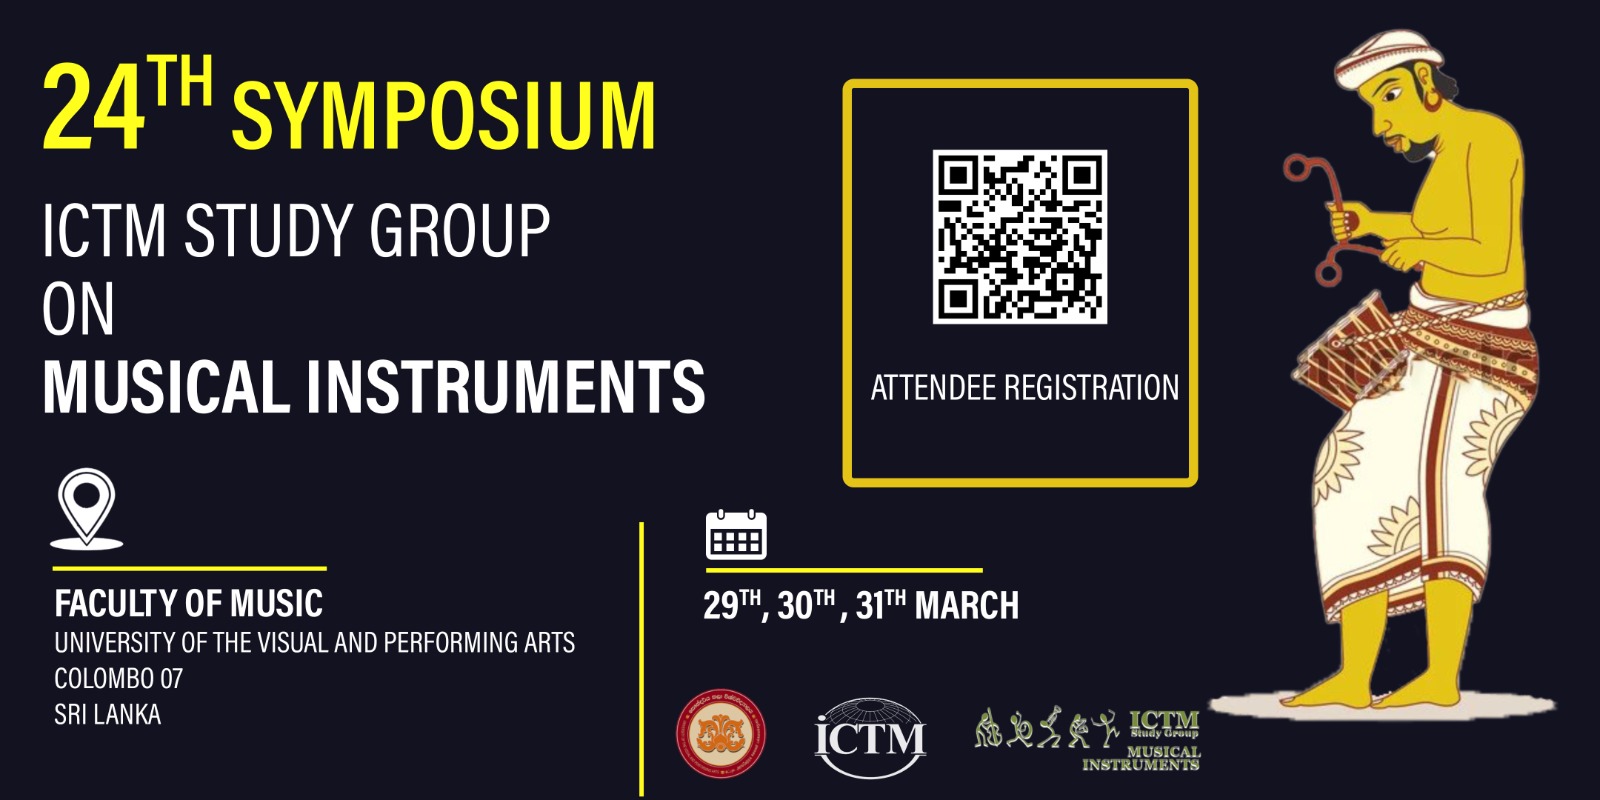 24th Symposium of the ICTM Study Group on Musical Instruments